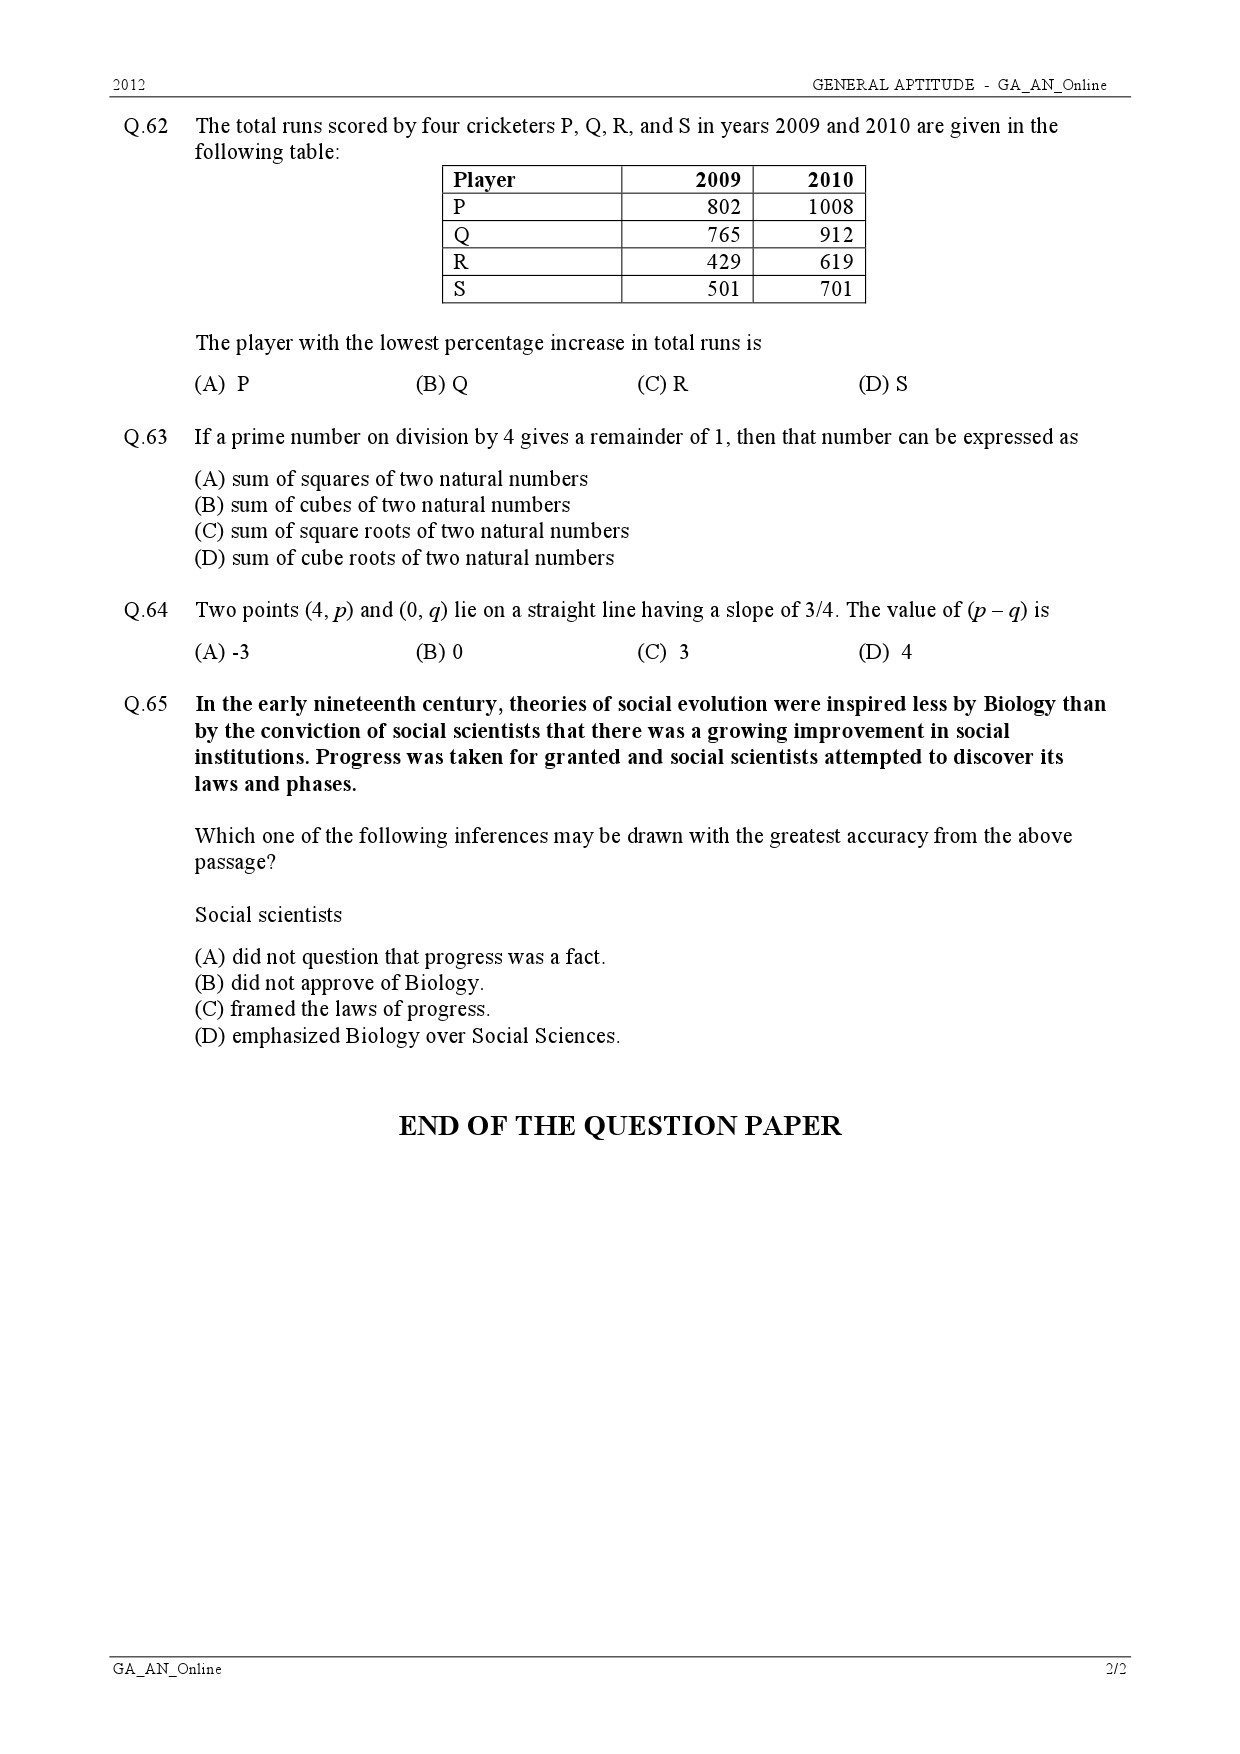 GATE Exam Question Paper 2012 Mining Engineering 12